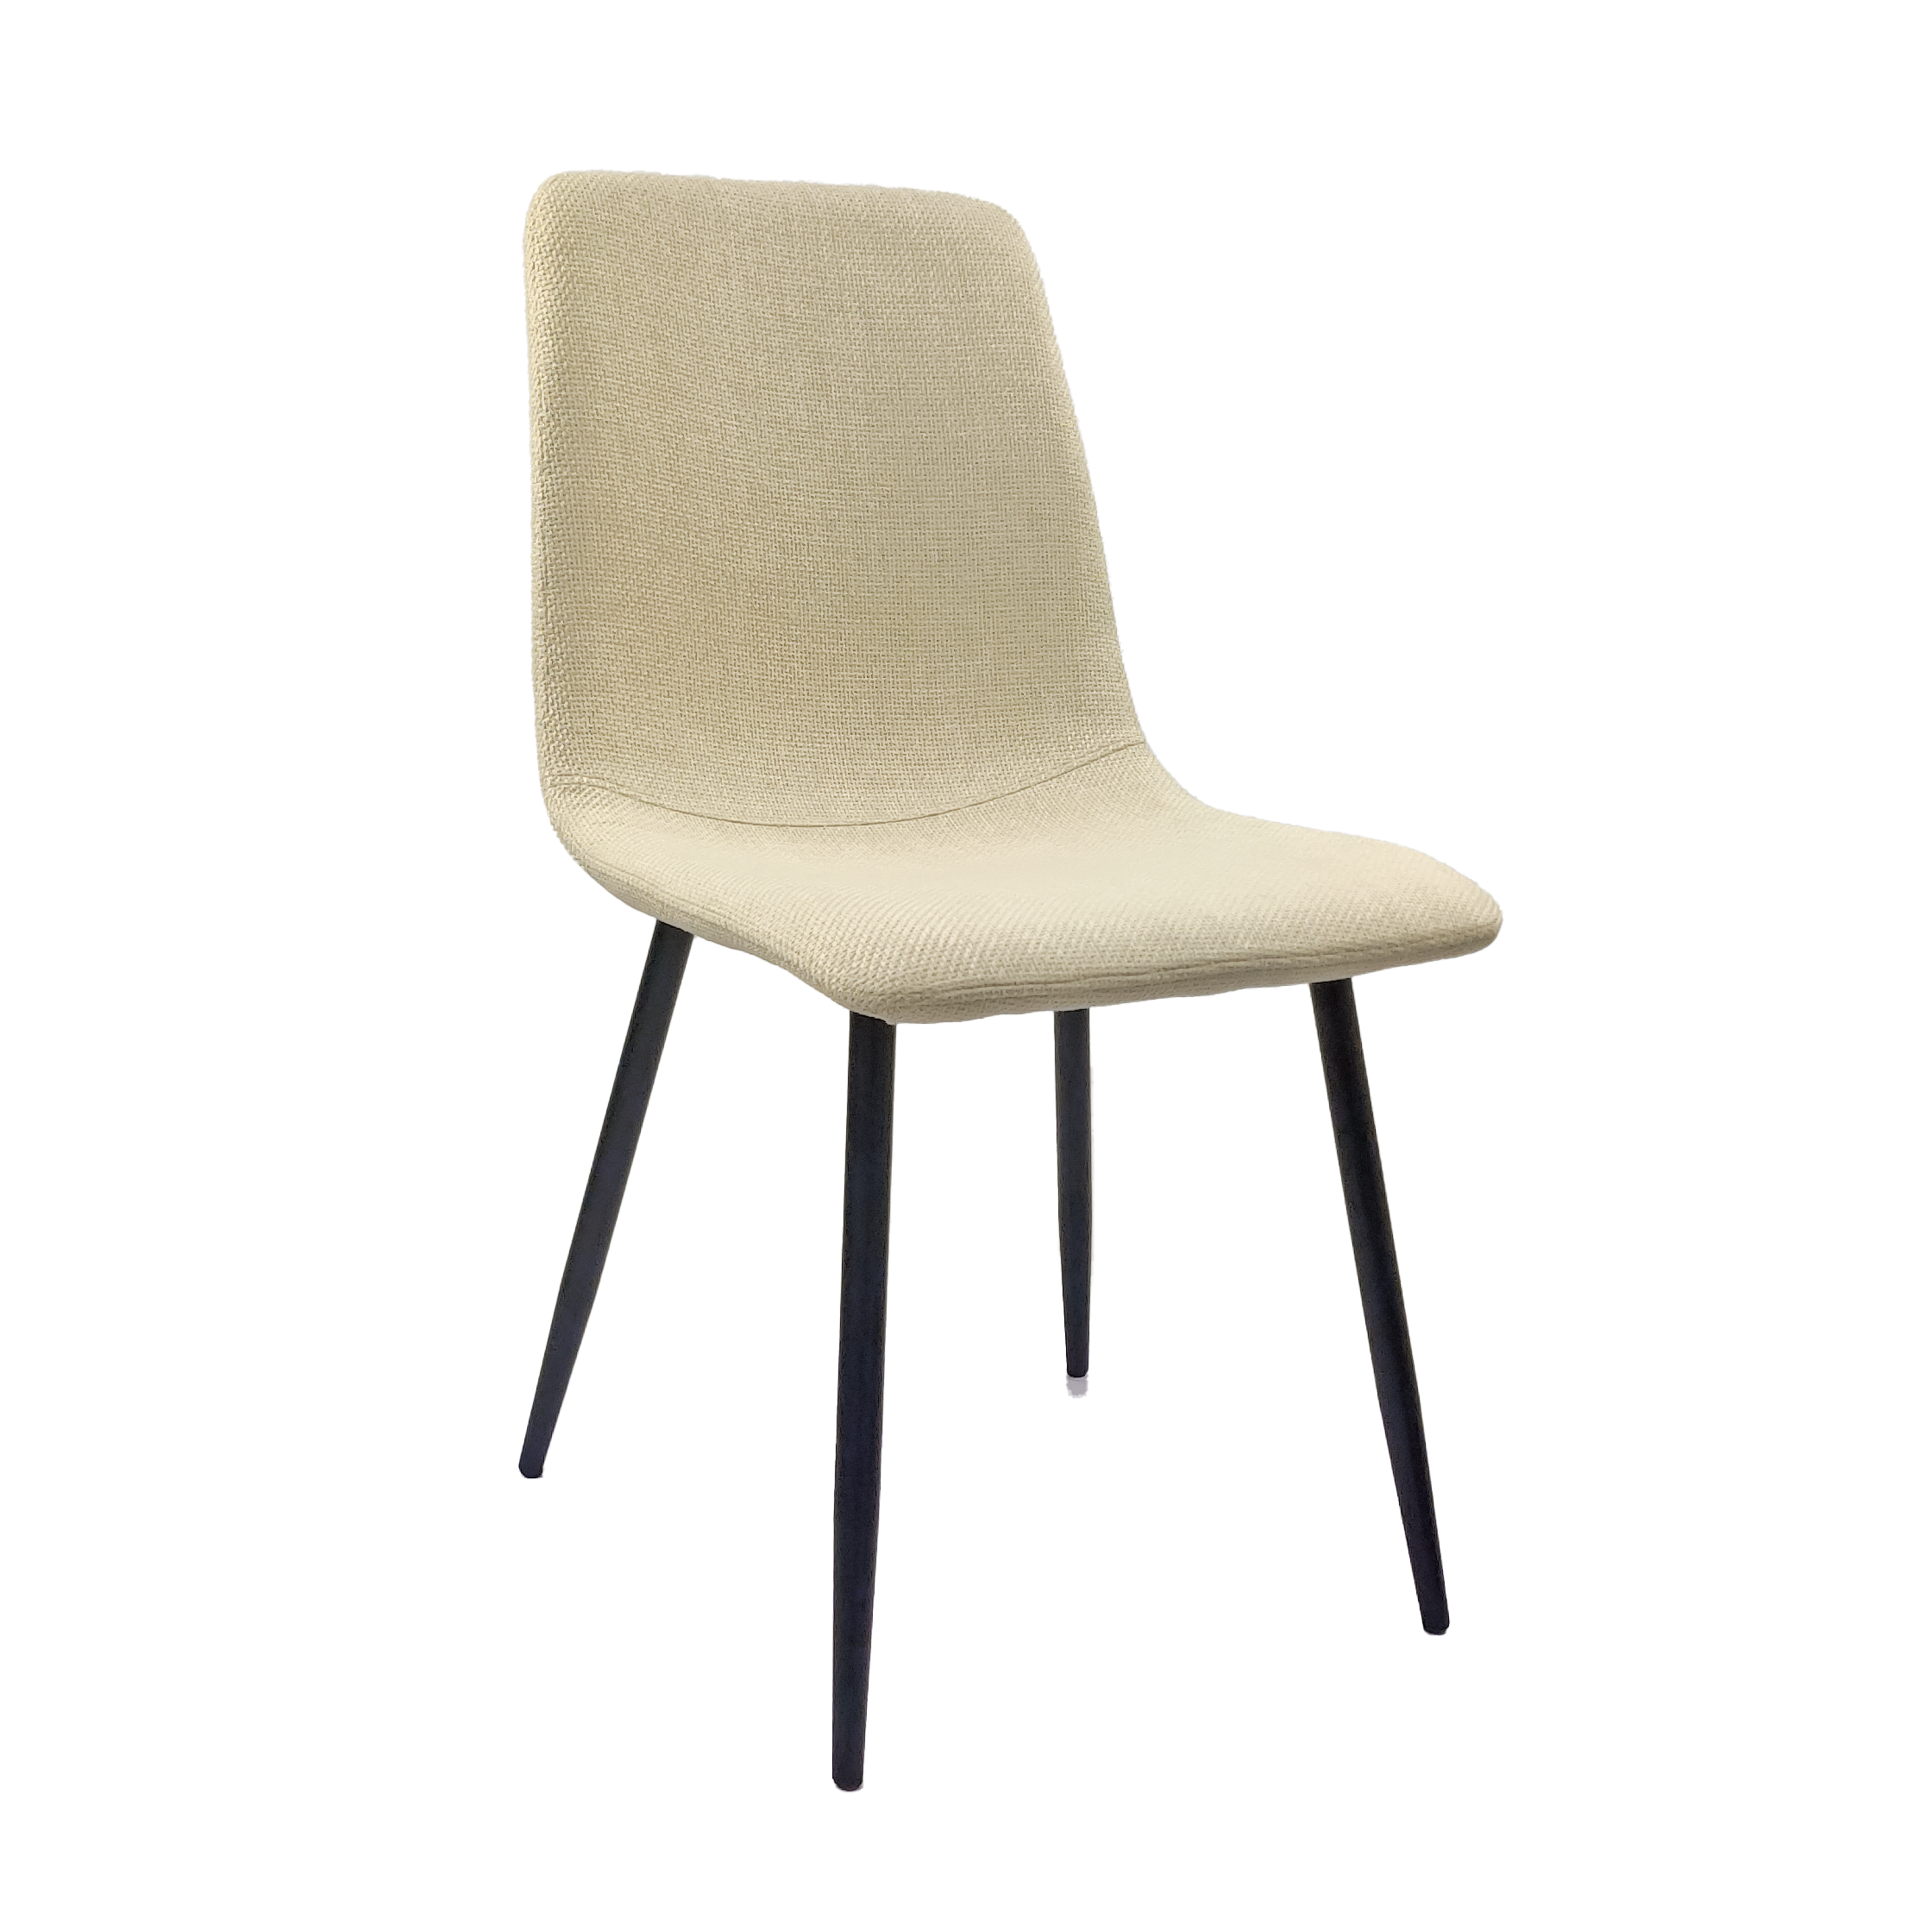 Set of 4 Modern Kitchen Dining Room Chairs, Cushion Seat and Sturdy Black Metal Legs - Beige